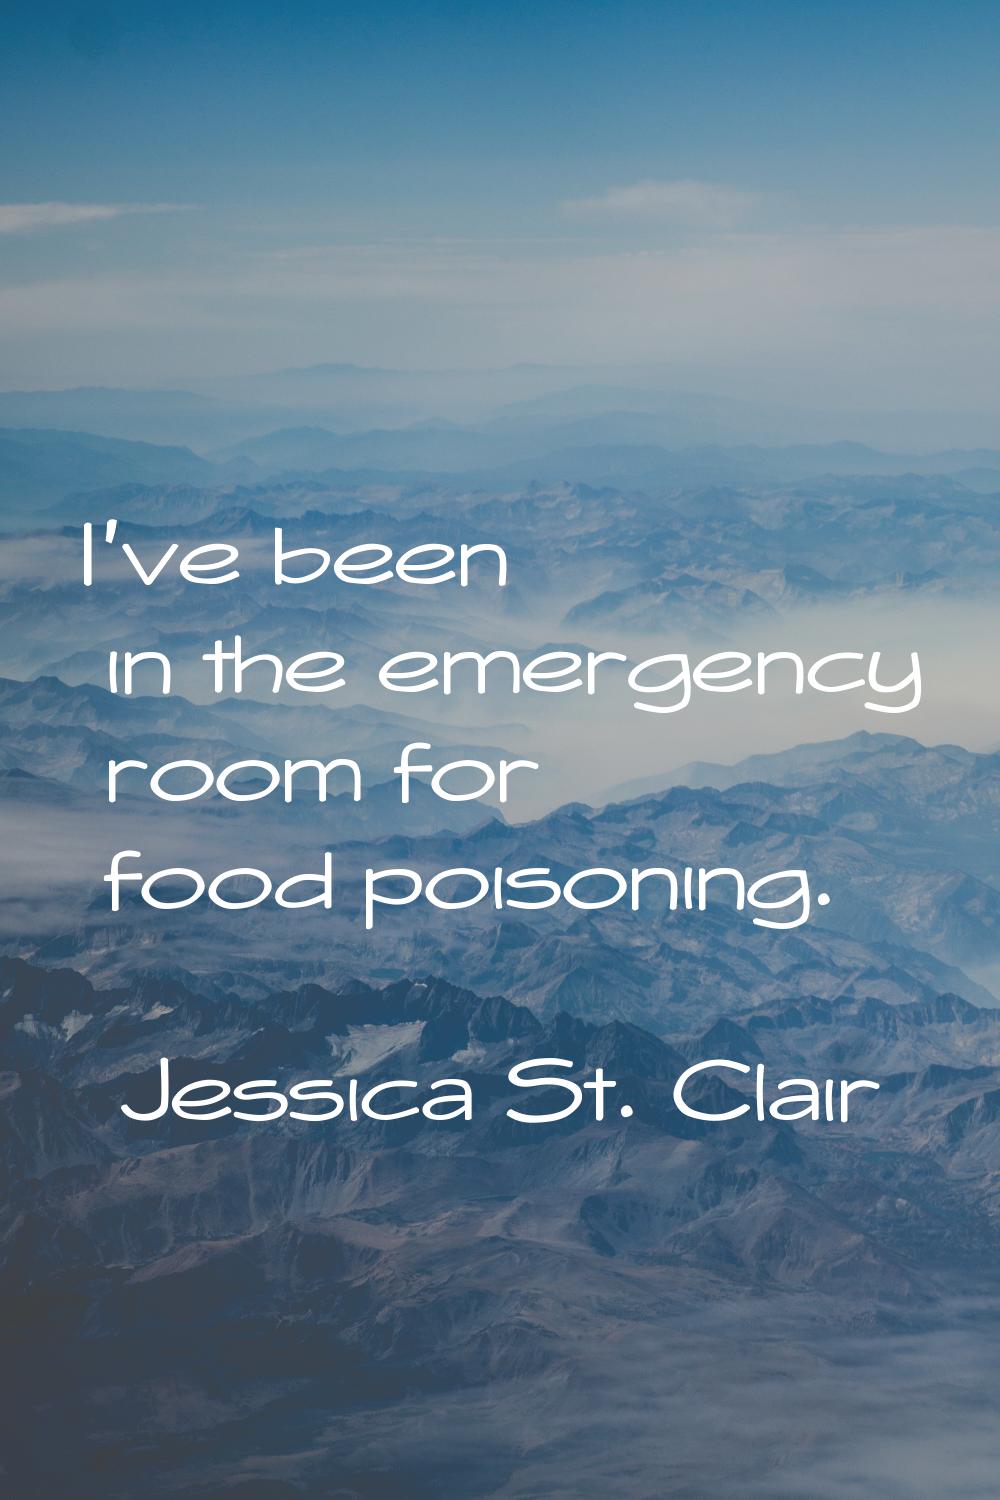 I've been in the emergency room for food poisoning.